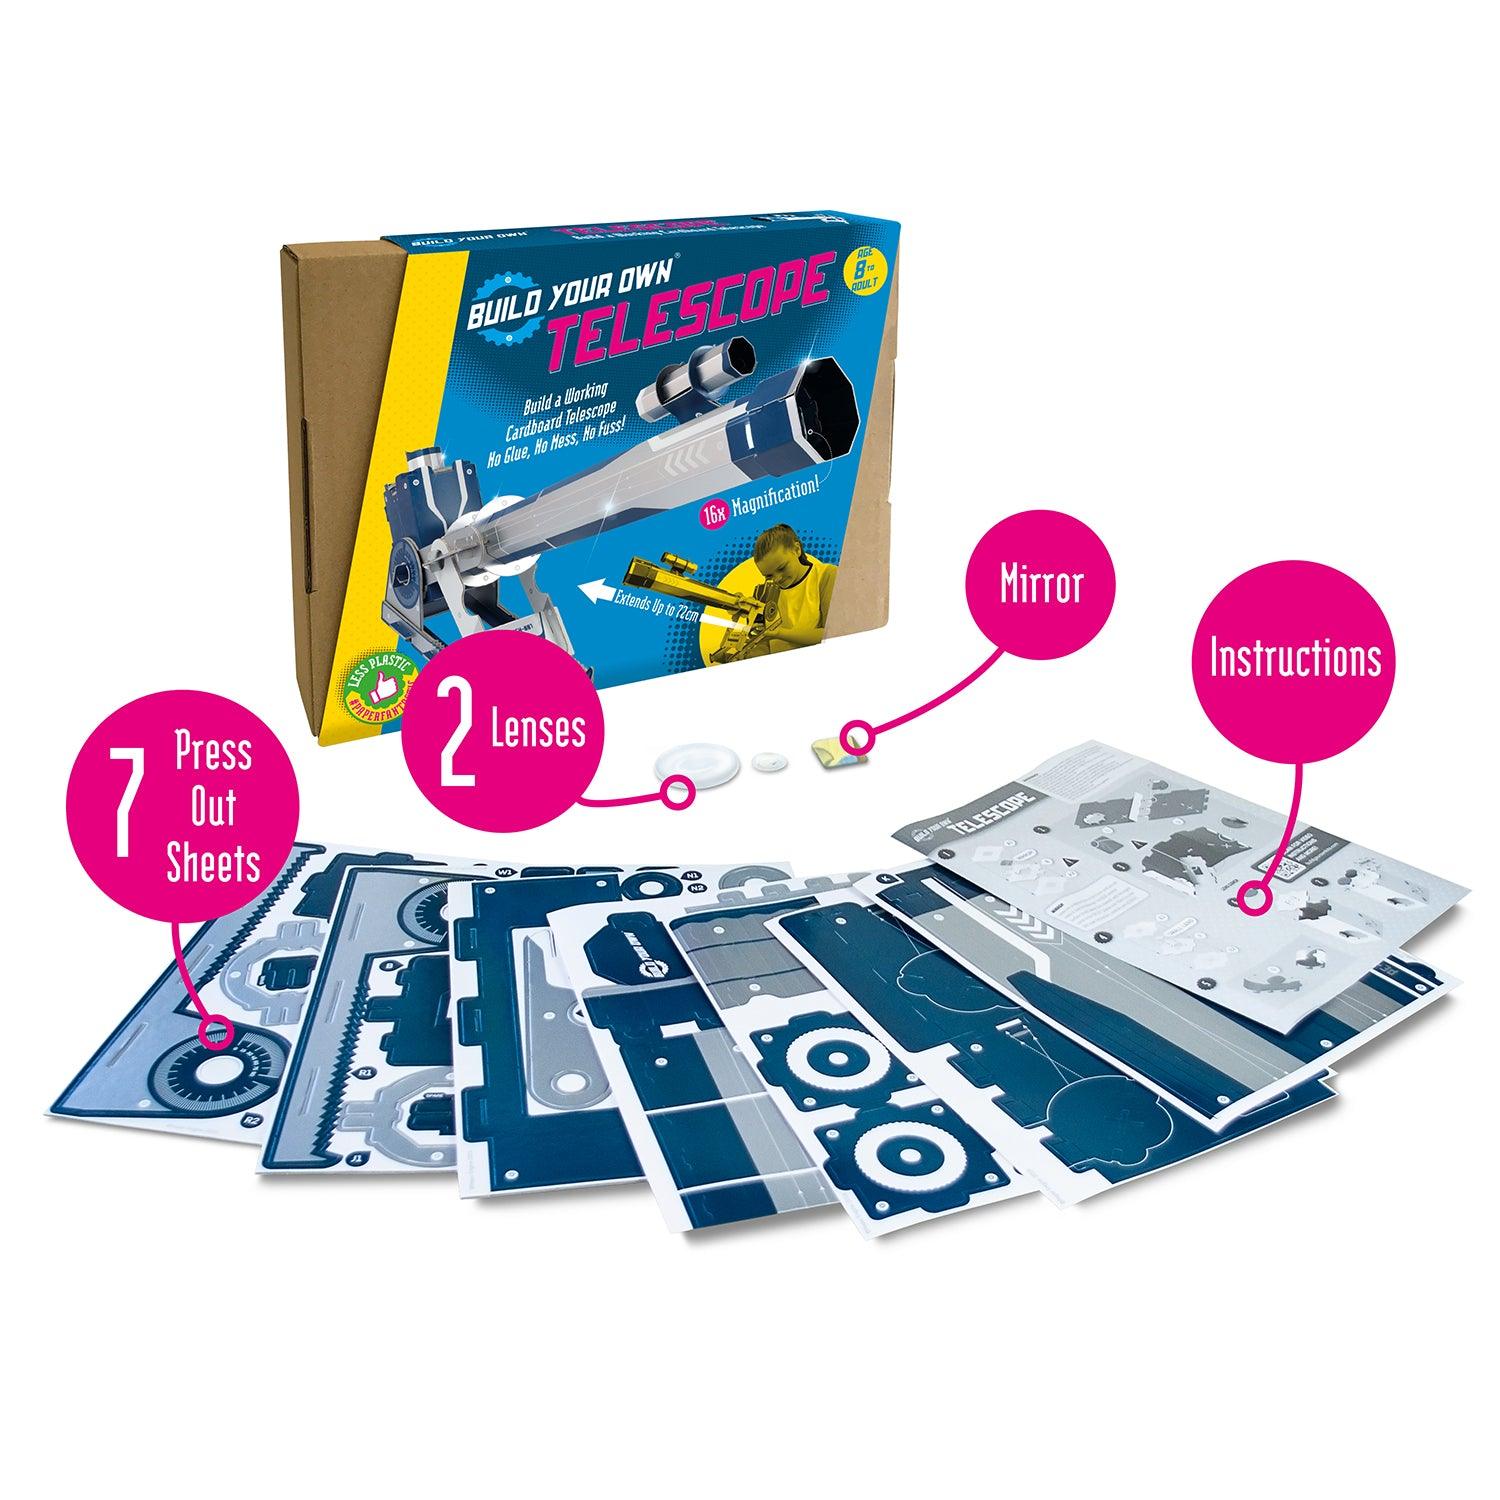 Build Your Own Telescope Kit - Kits - Science Museum Shop